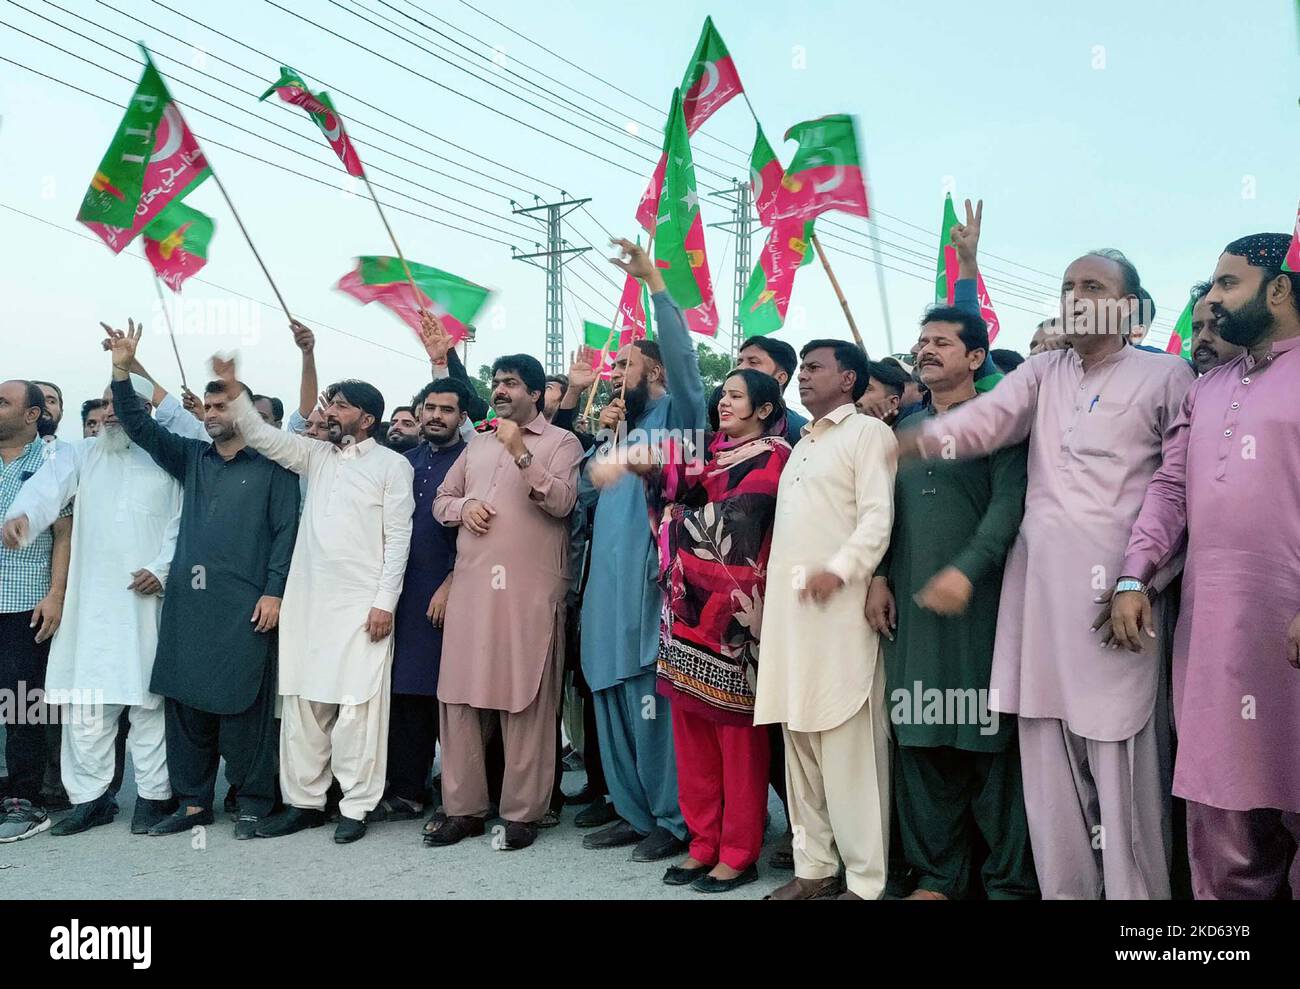 Members of Tehreek-e-Insaf (PTI) are holding protest demonstration against assassination attempt on Imran Khan, PTI Chairman during Long March in Wazirabad, held in Sukkur on Saturday, November 05, 2022. Stock Photo